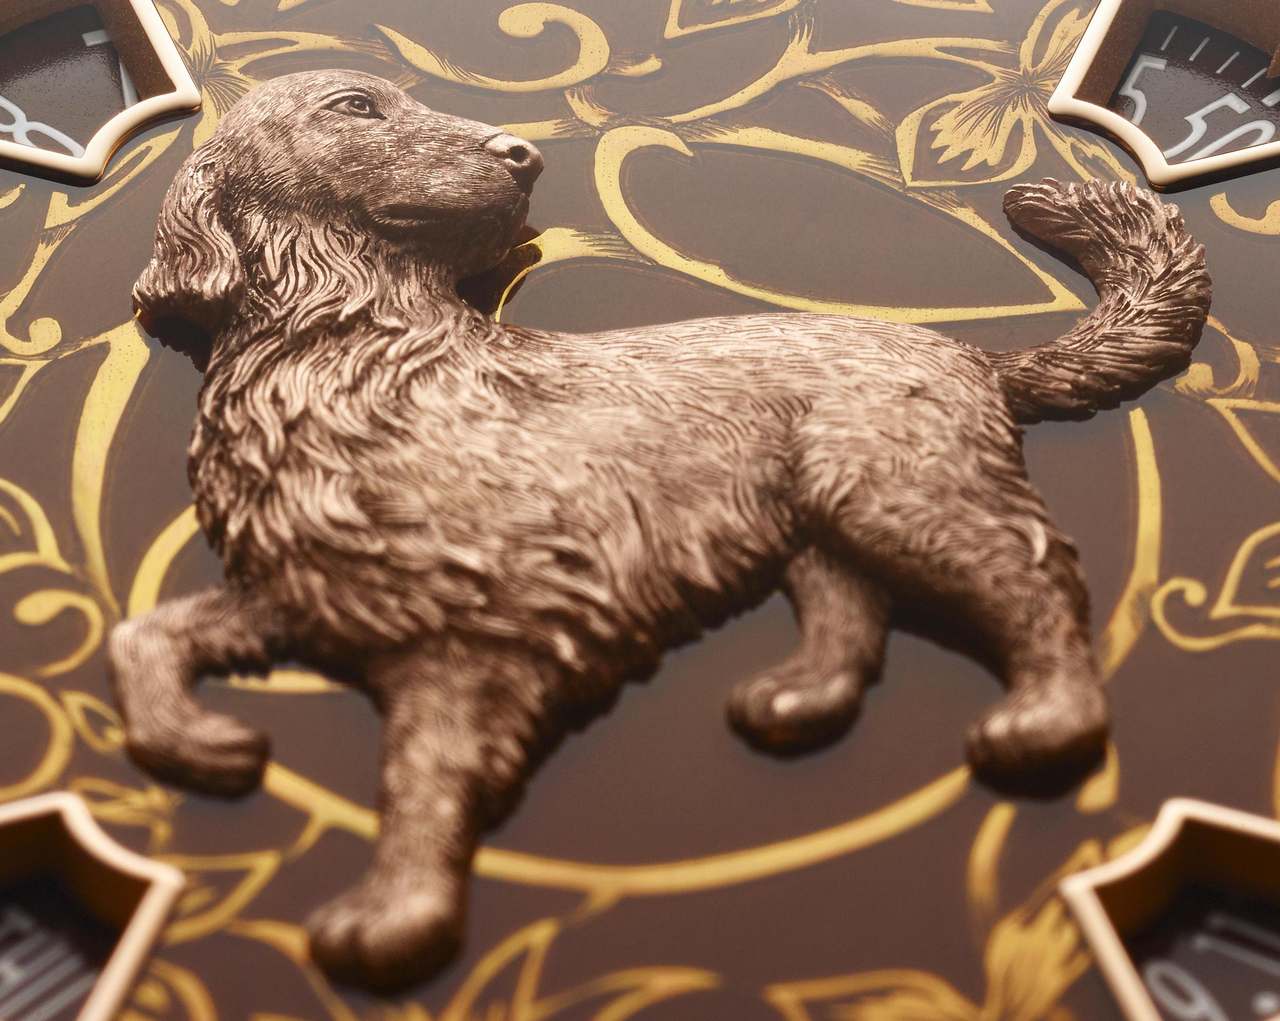 METIERS D’ART THE LEGEND OF THE CHINESE ZODIAC – year of the dog